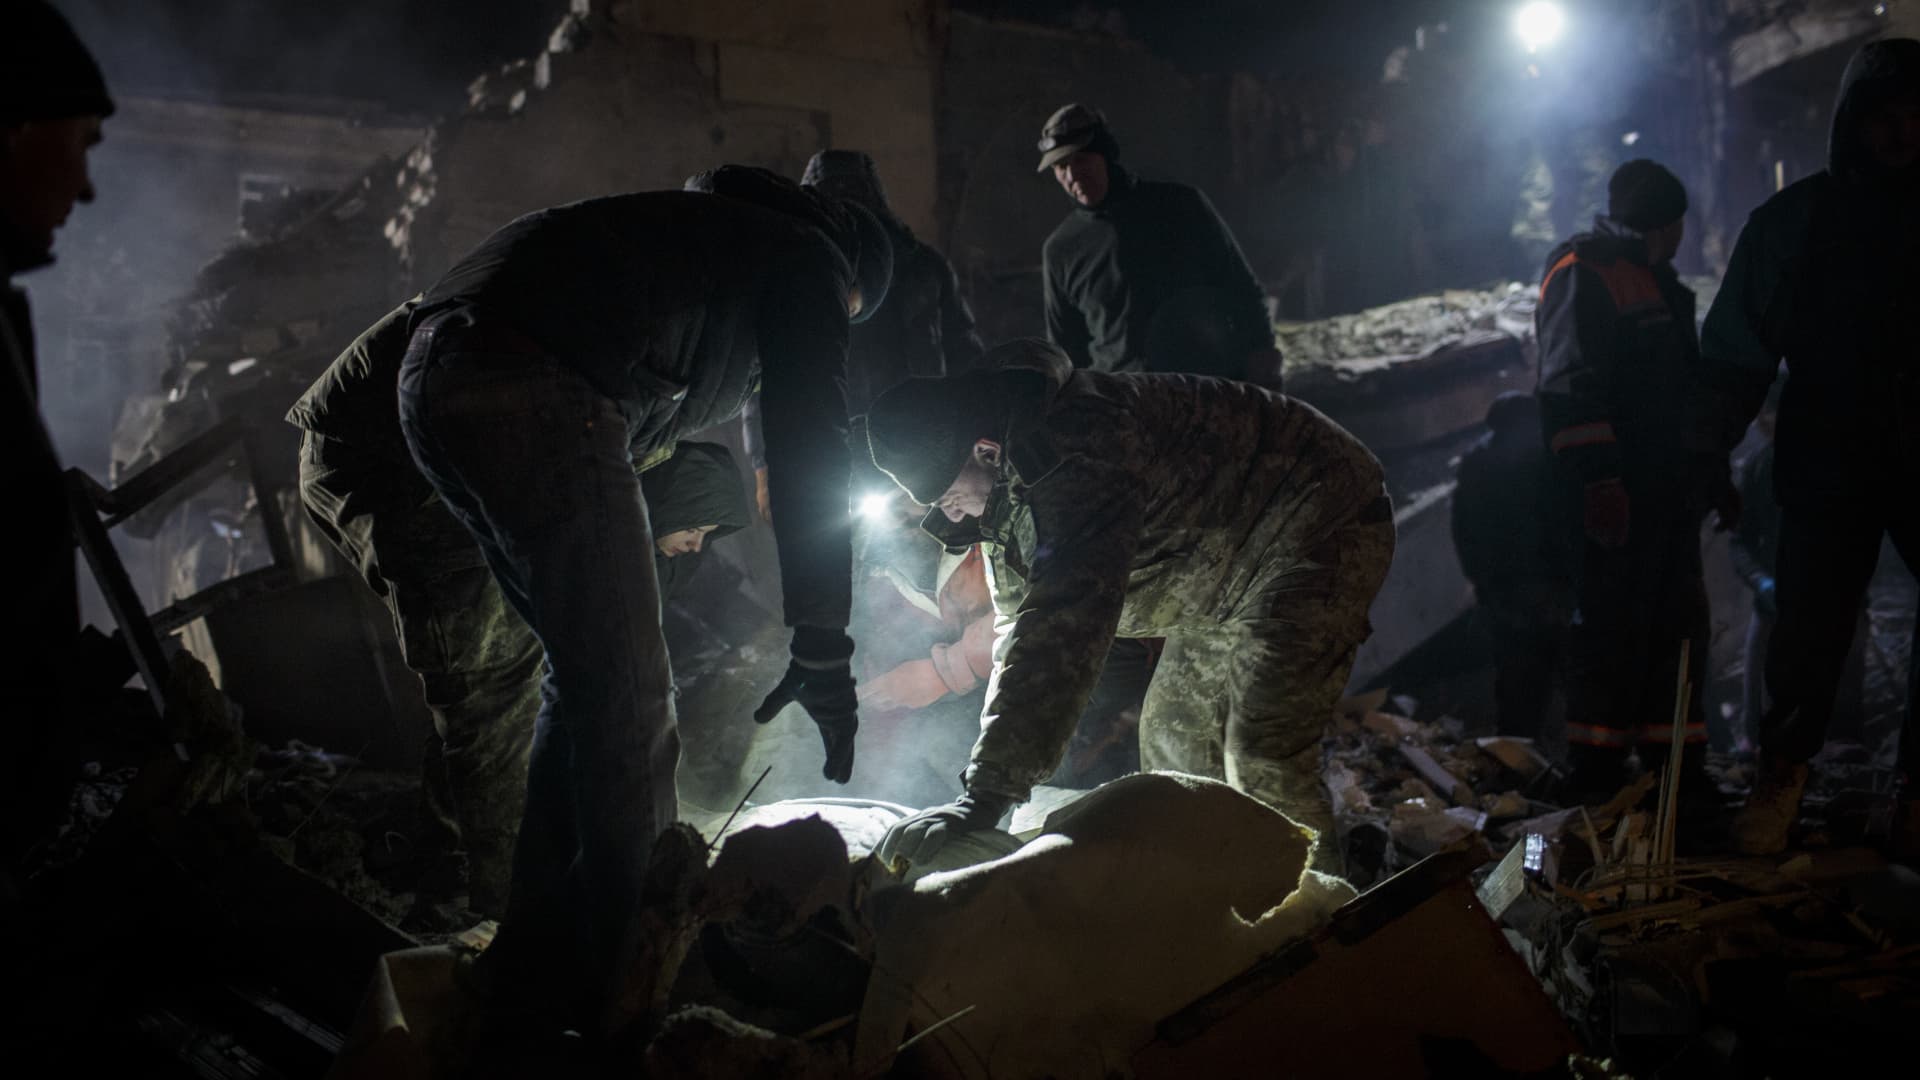 Rescue workers conduct search and rescue operation after Russian missile hits the residential building in Kramatorsk, Donetsk Oblast, Ukraine on February